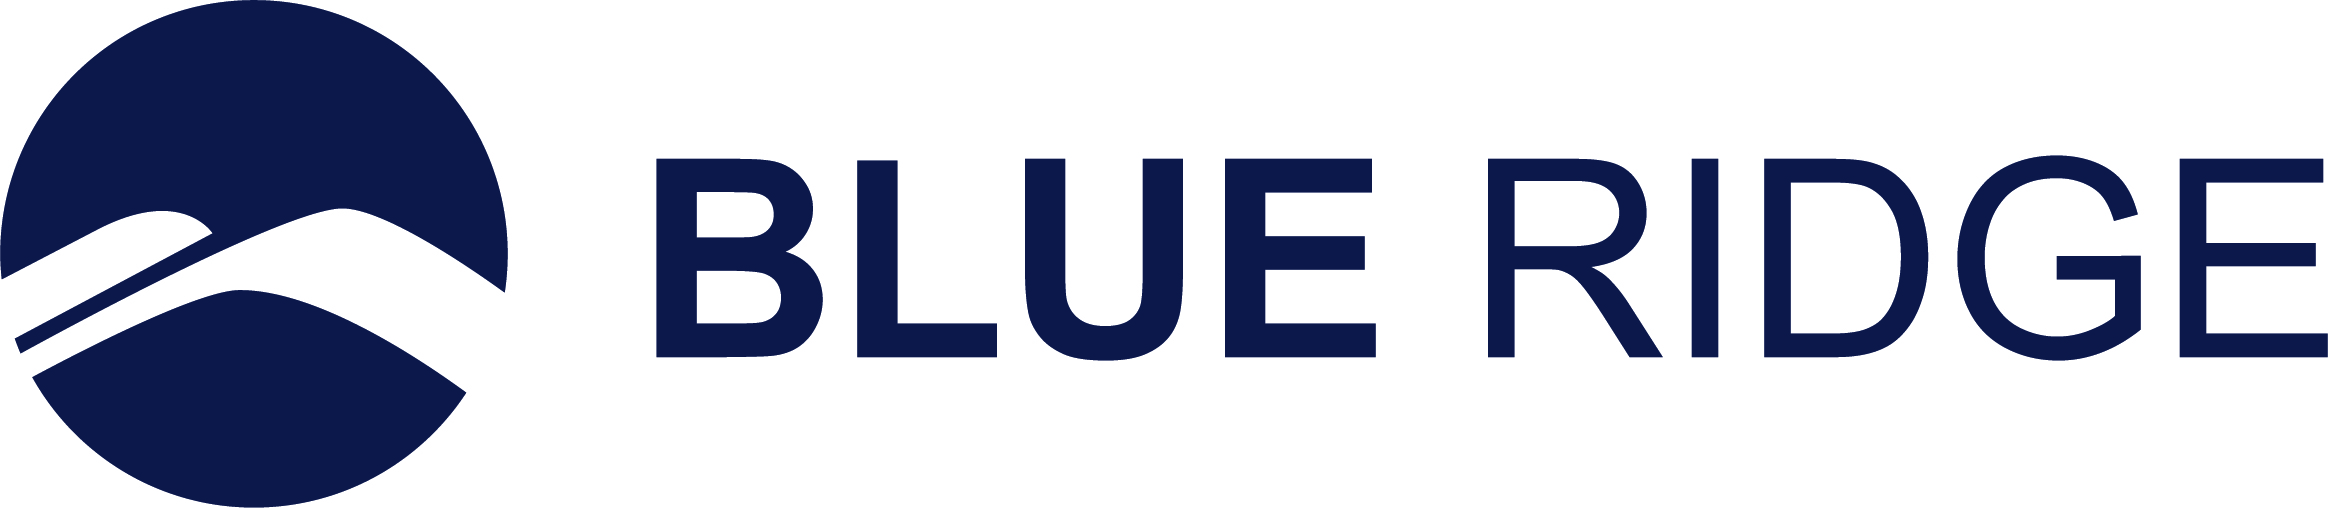 Blue Ridge Acquires Inventory Investment AS, Strengthens Supply Chain Planning and Pricing Platform 